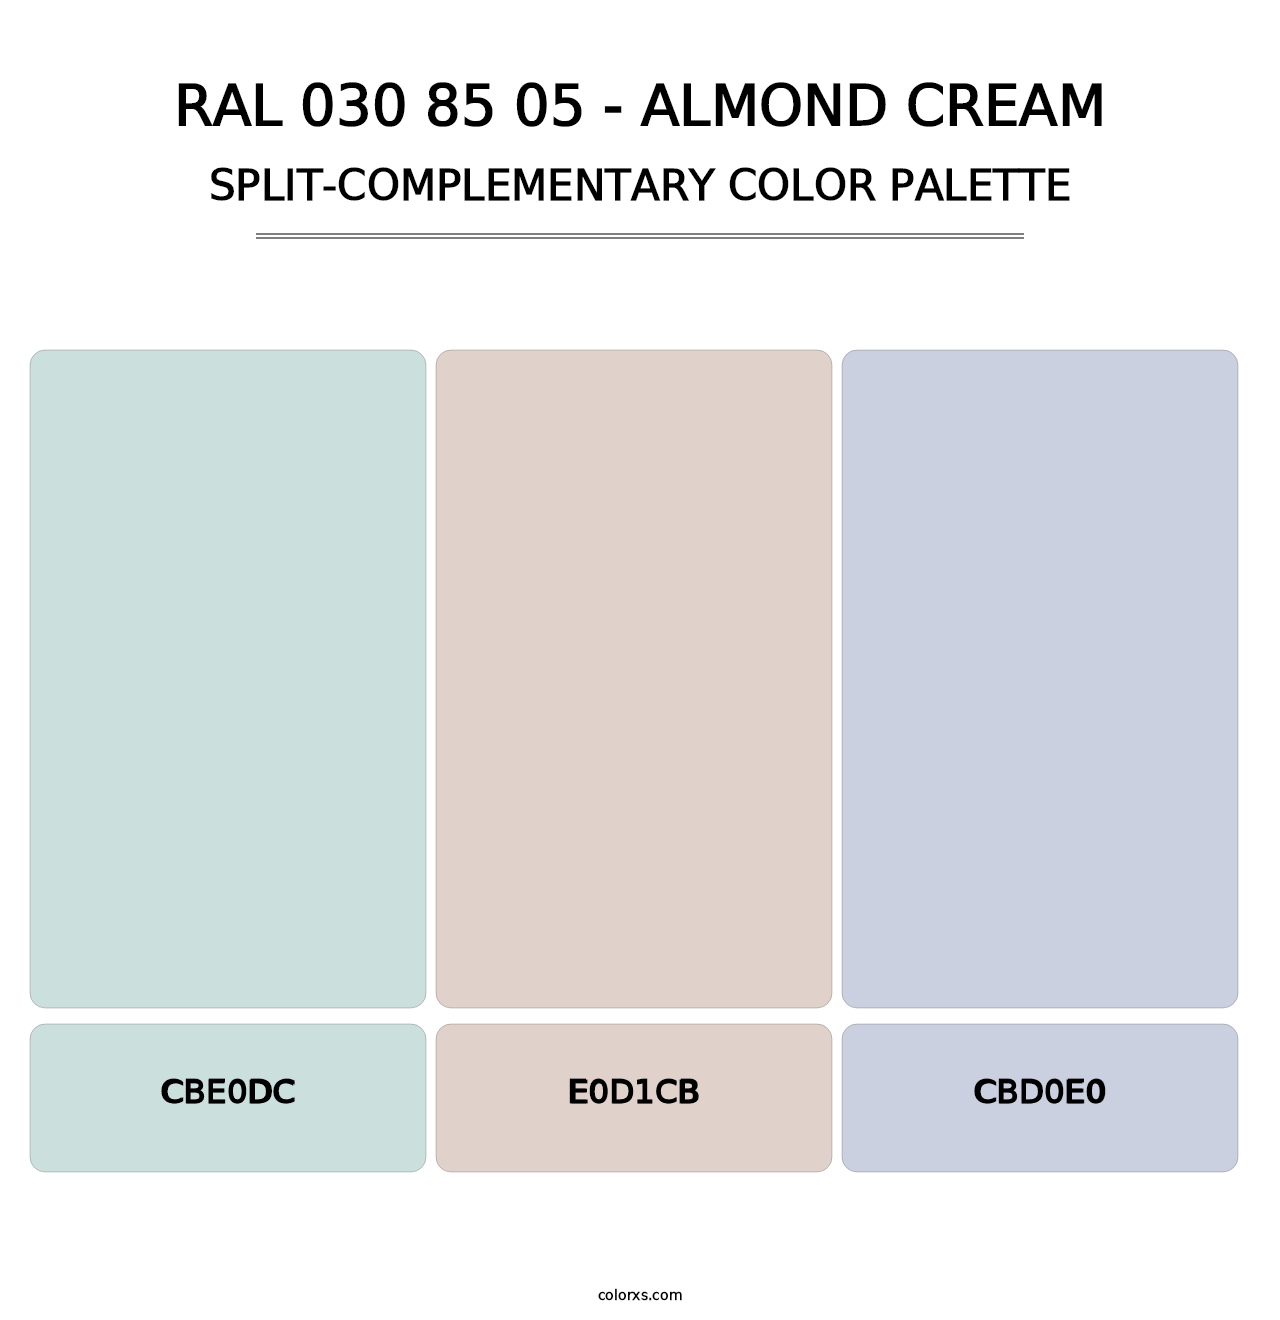 RAL 030 85 05 - Almond Cream - Split-Complementary Color Palette